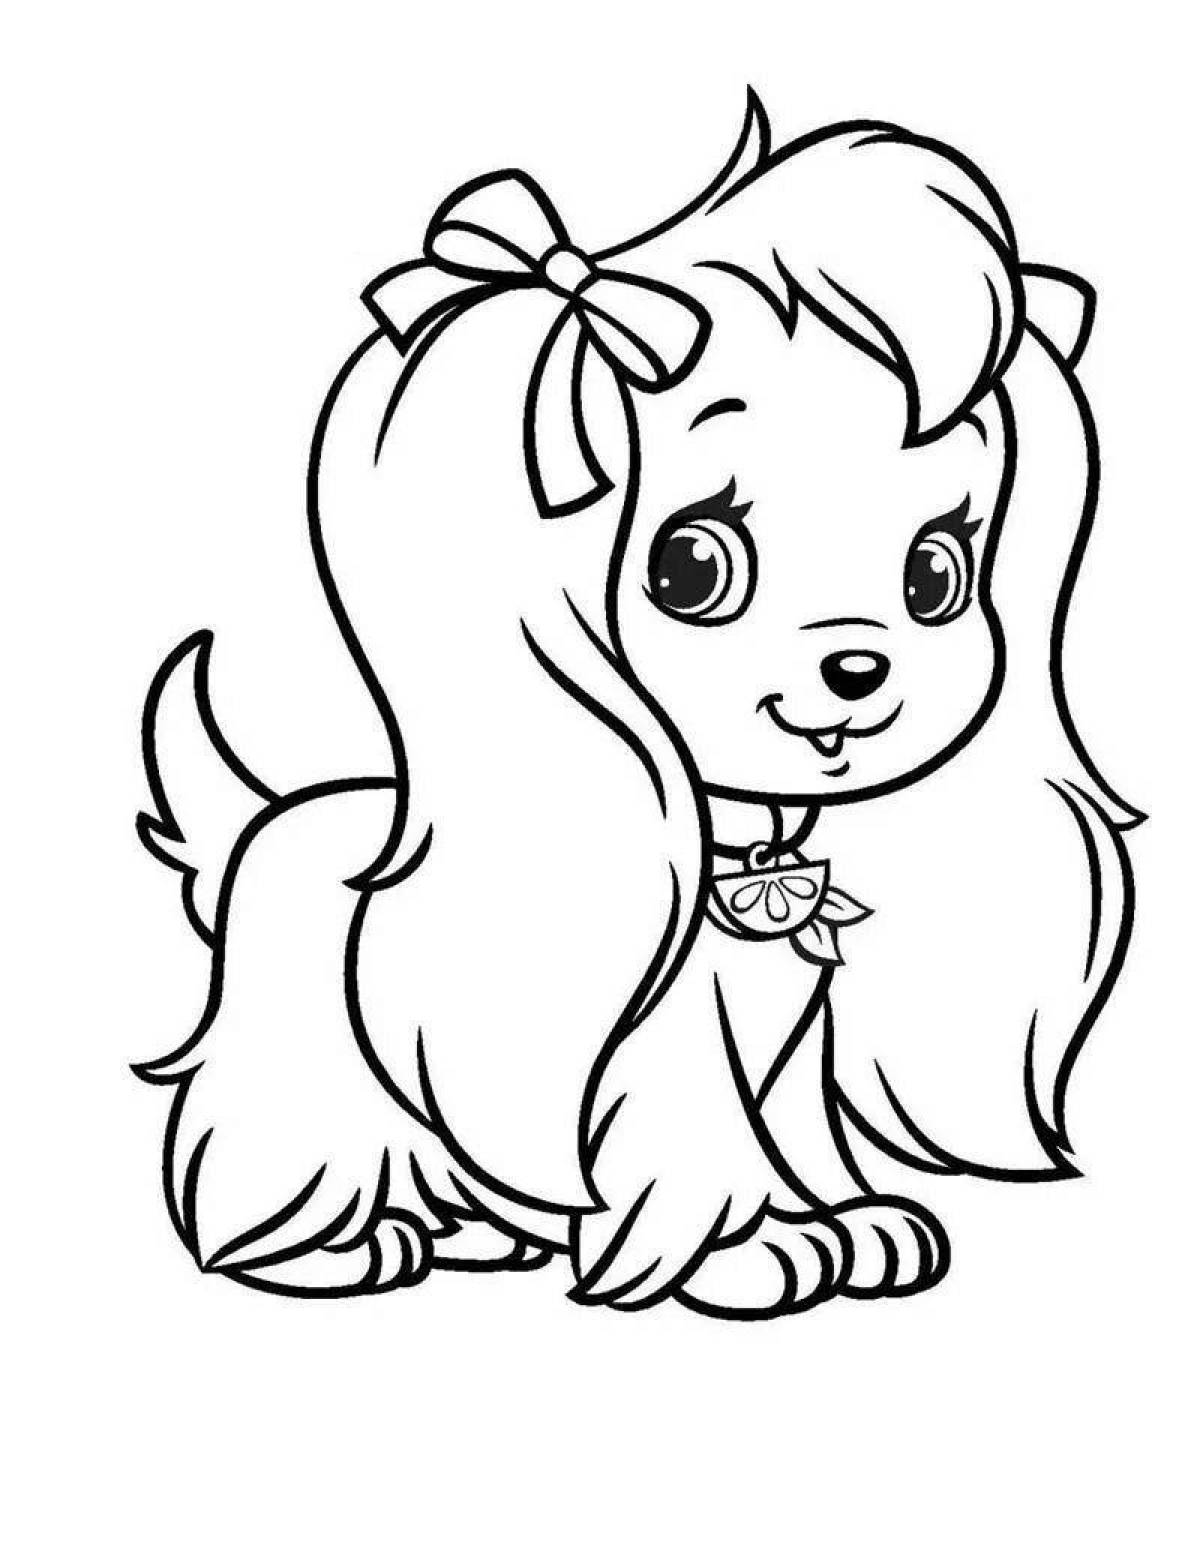 Inspiring coloring book for 6-7 year olds for girls animals